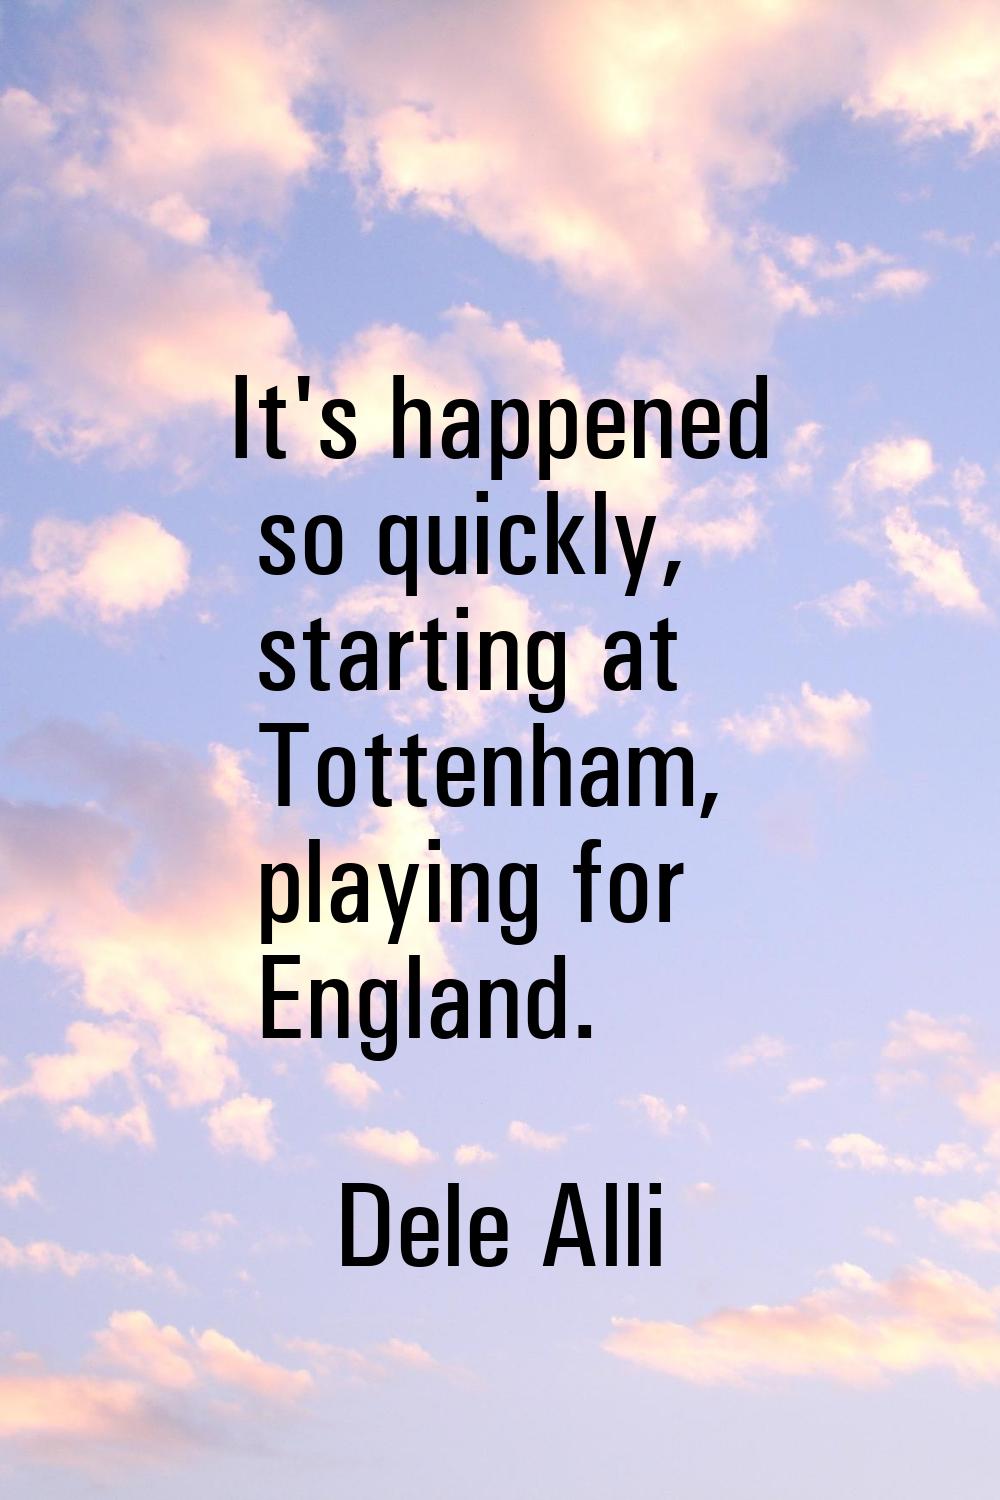 It's happened so quickly, starting at Tottenham, playing for England.